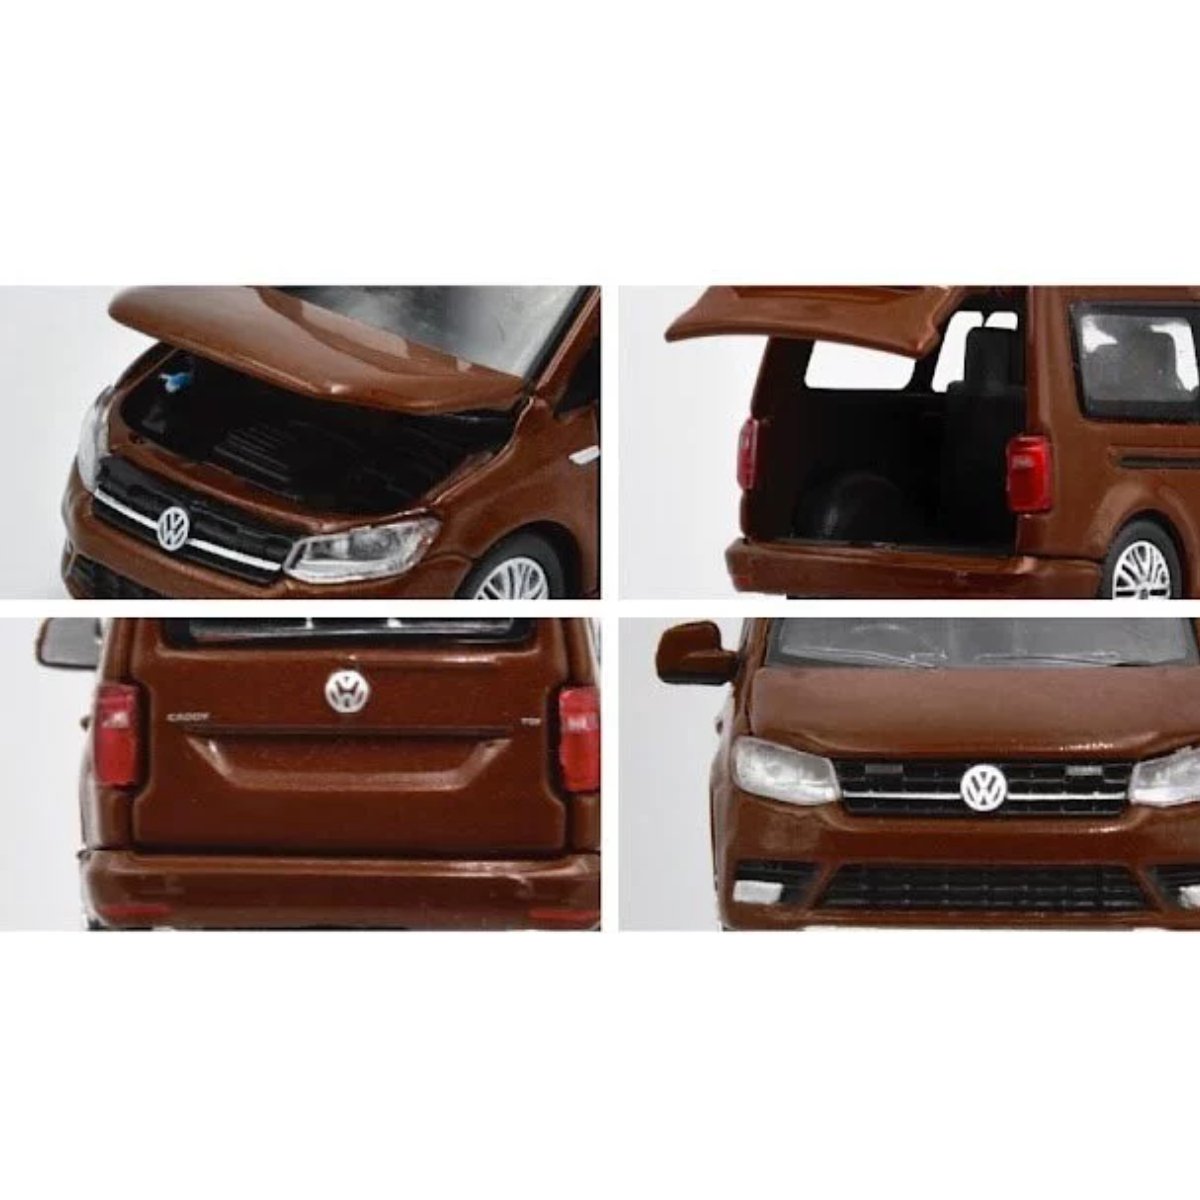 Era Car Volkswagen Caddy Maxi 1st Special Edition Chocolate (1:64 Scale) - Phillips Hobbies